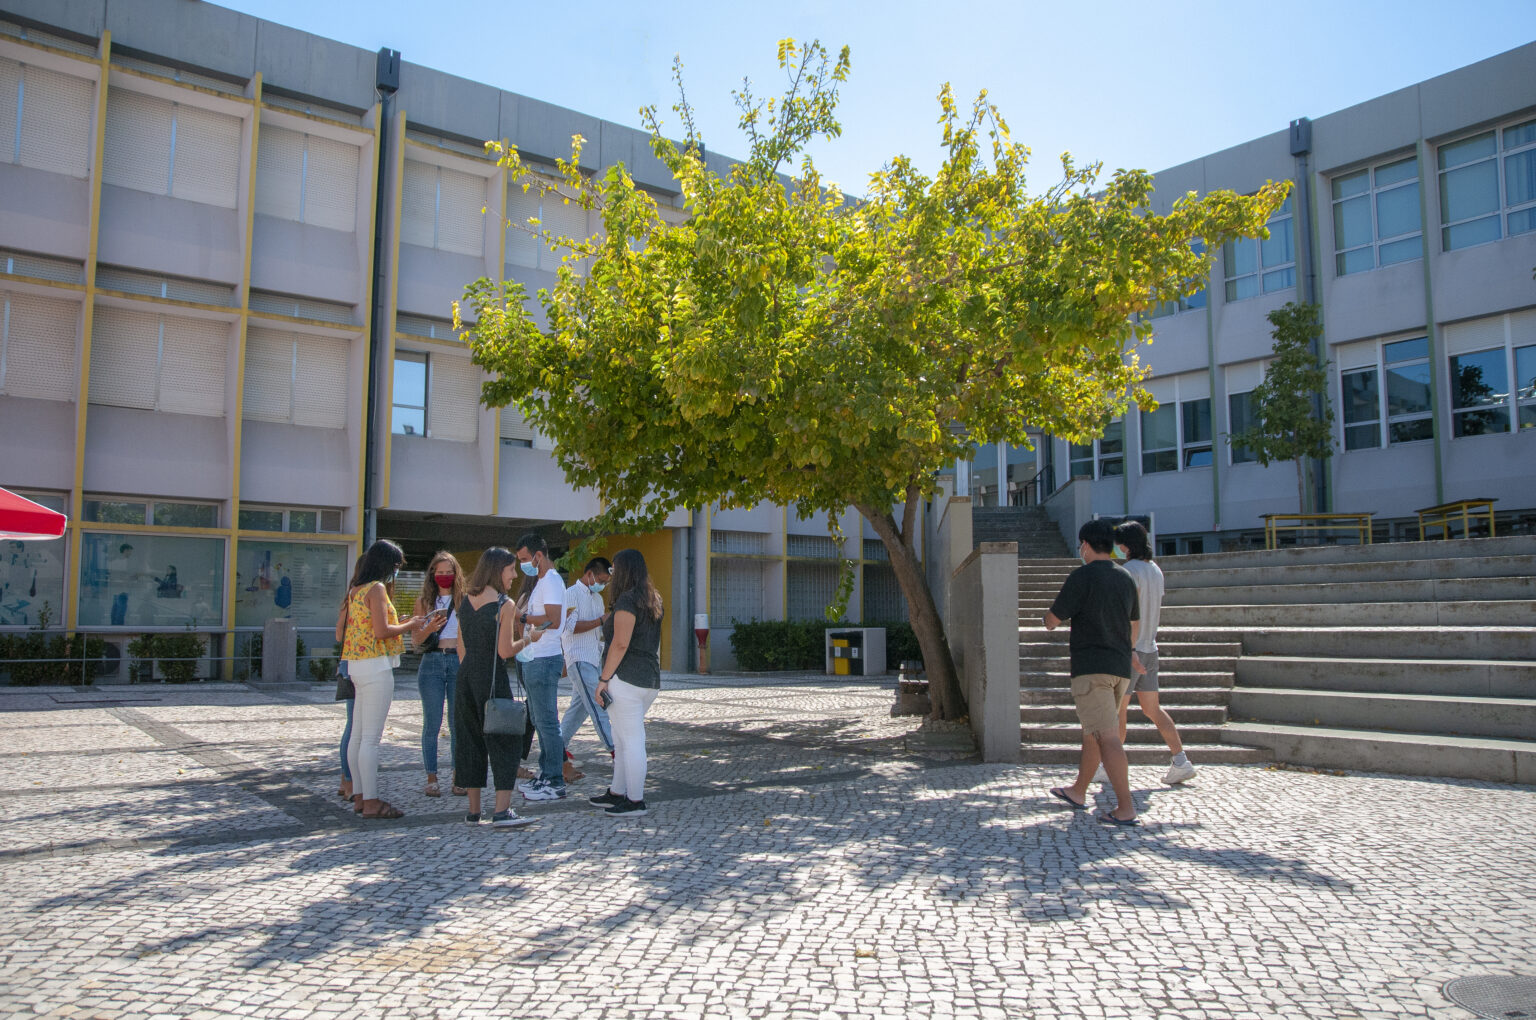 SmartLife Summer School 2020, SmartLife – Smart Sensing and Systems for Everyday Life”  took place at Iscte and  Instituto de Telecomunicações-IUL. from the 27th of july till the 30th of october 2020.
Developing a sports app using react native and smartphone sensors, by João Monge.
https://ieee-imspt.org/2020/07/27/summer-school-2020-smart-life/
Fotografia de Hugo Alexandre Cruz.